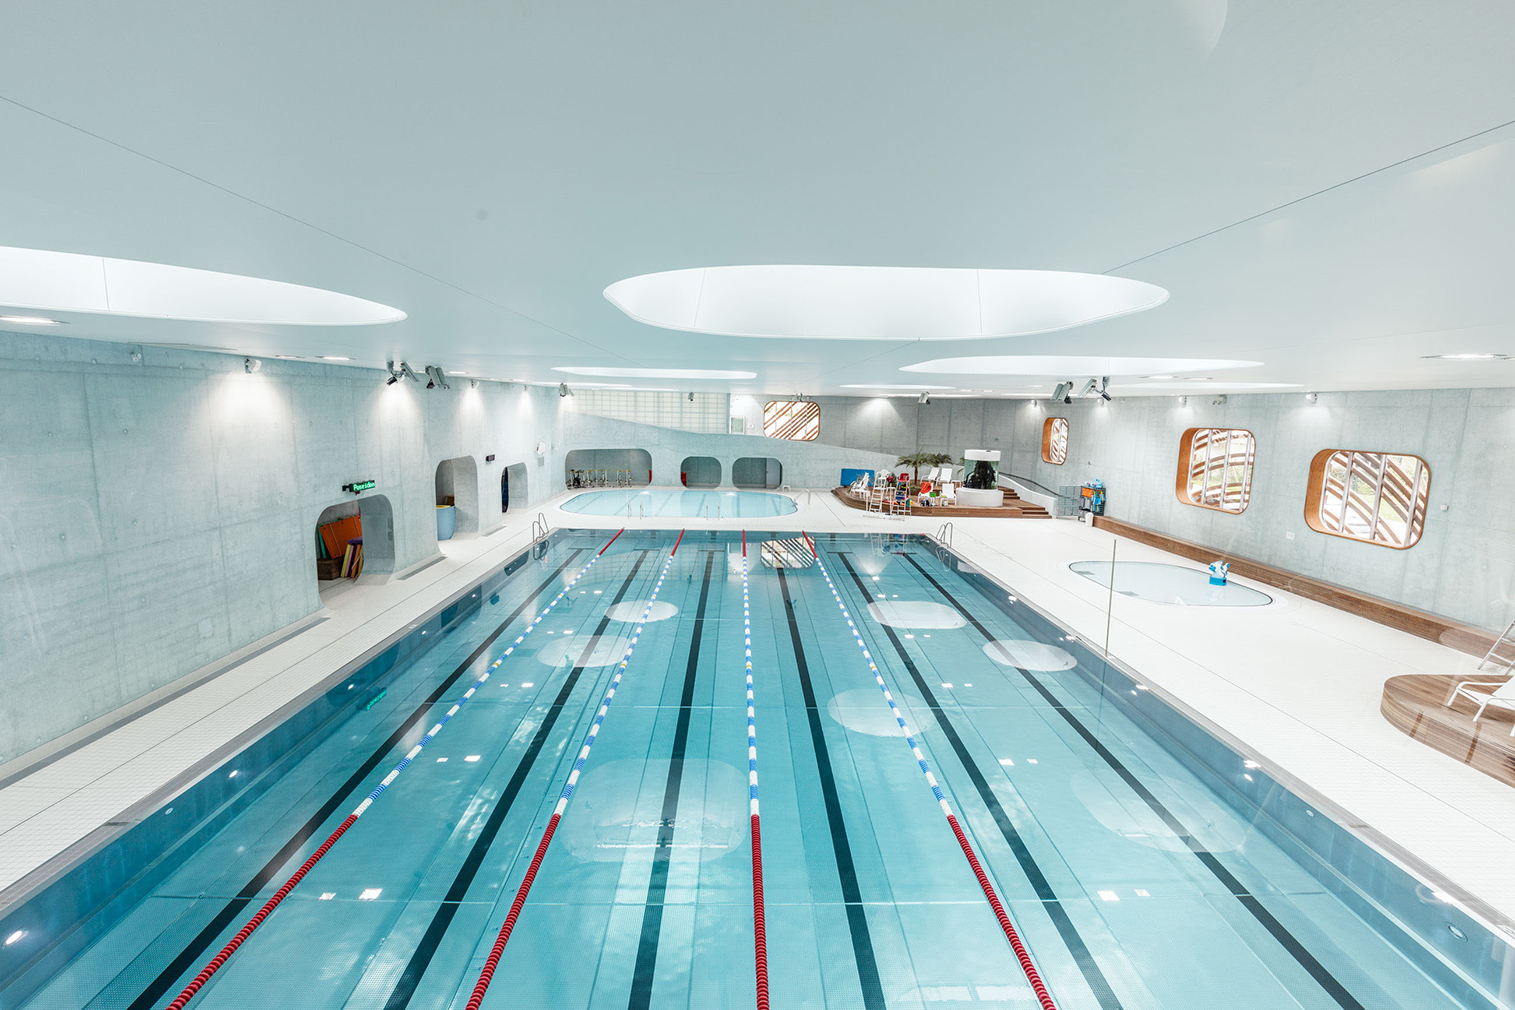 Paris swimming pools photo essay by Ludwig Favre